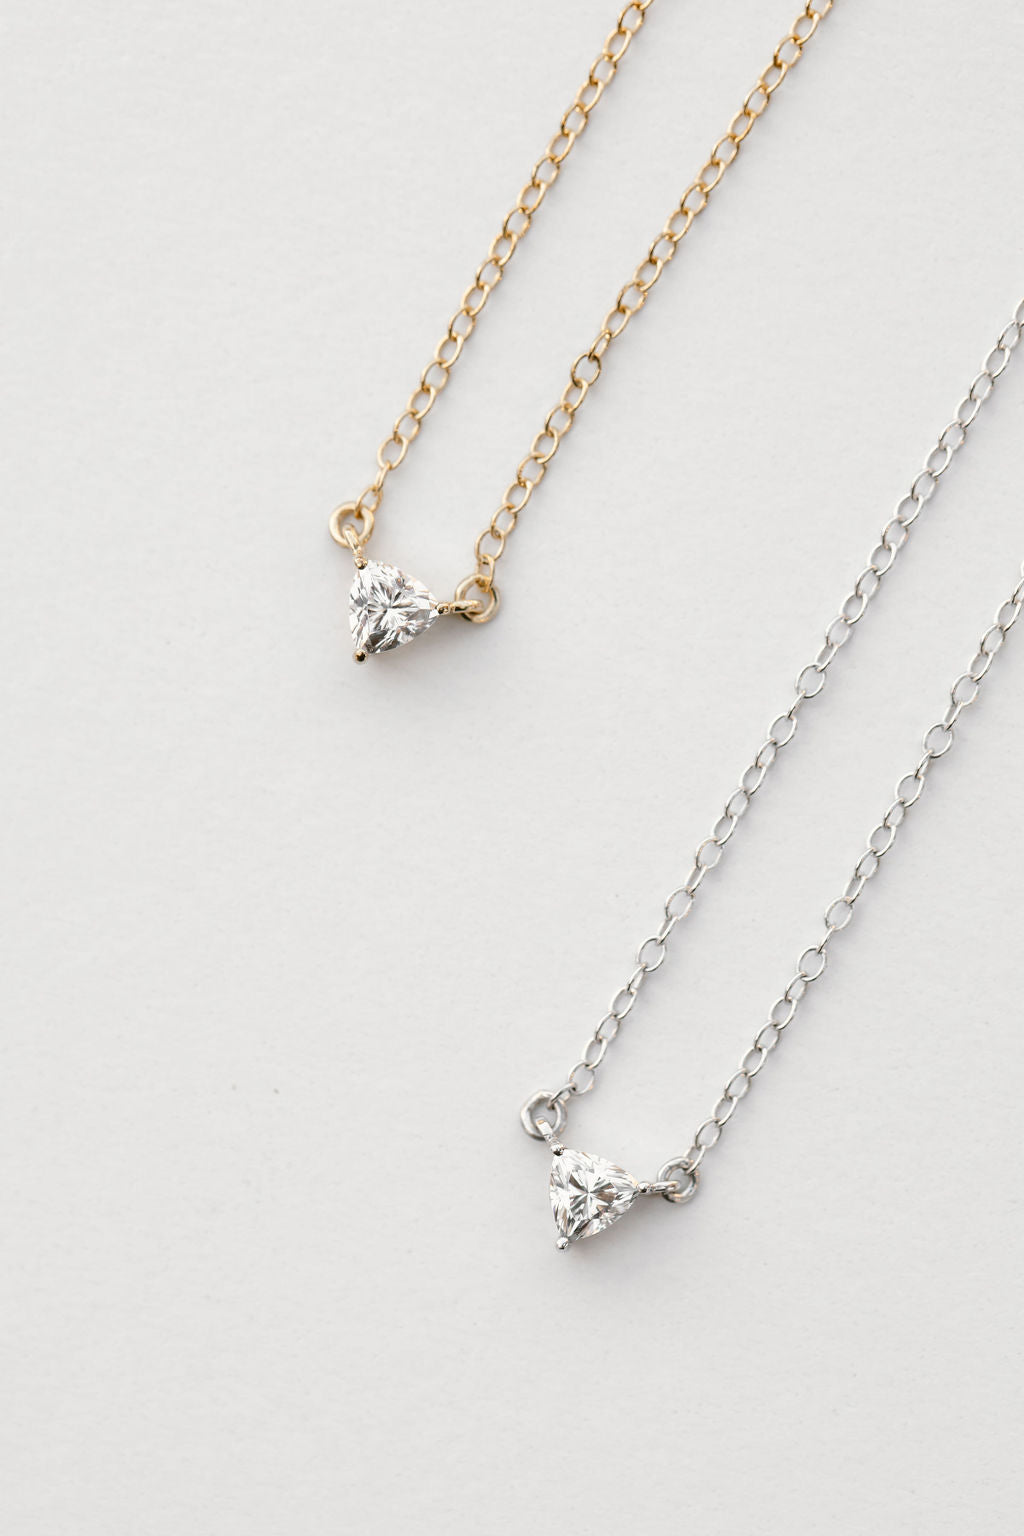 yellow gold and white gold diamond pendant necklace